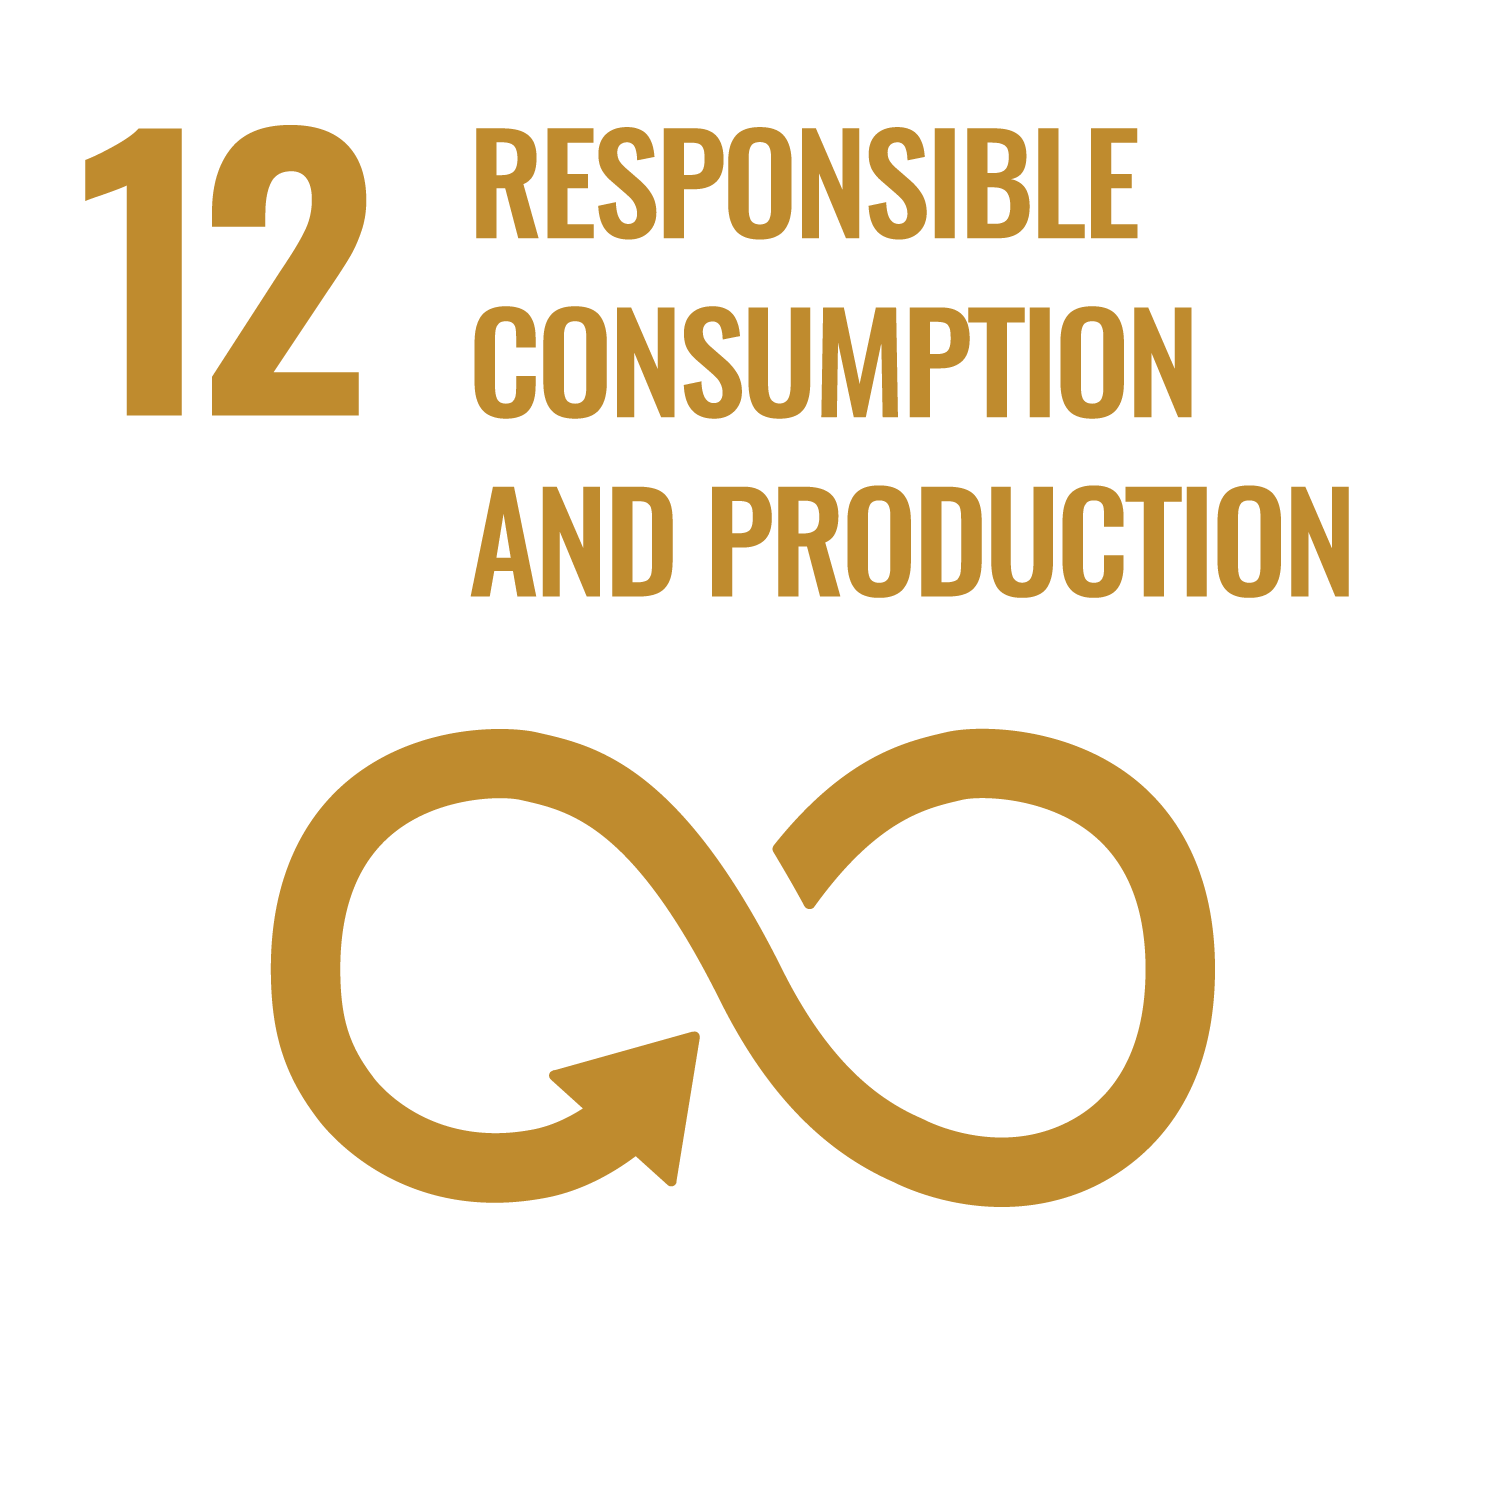 SDG goal 12: responsible consumption and production